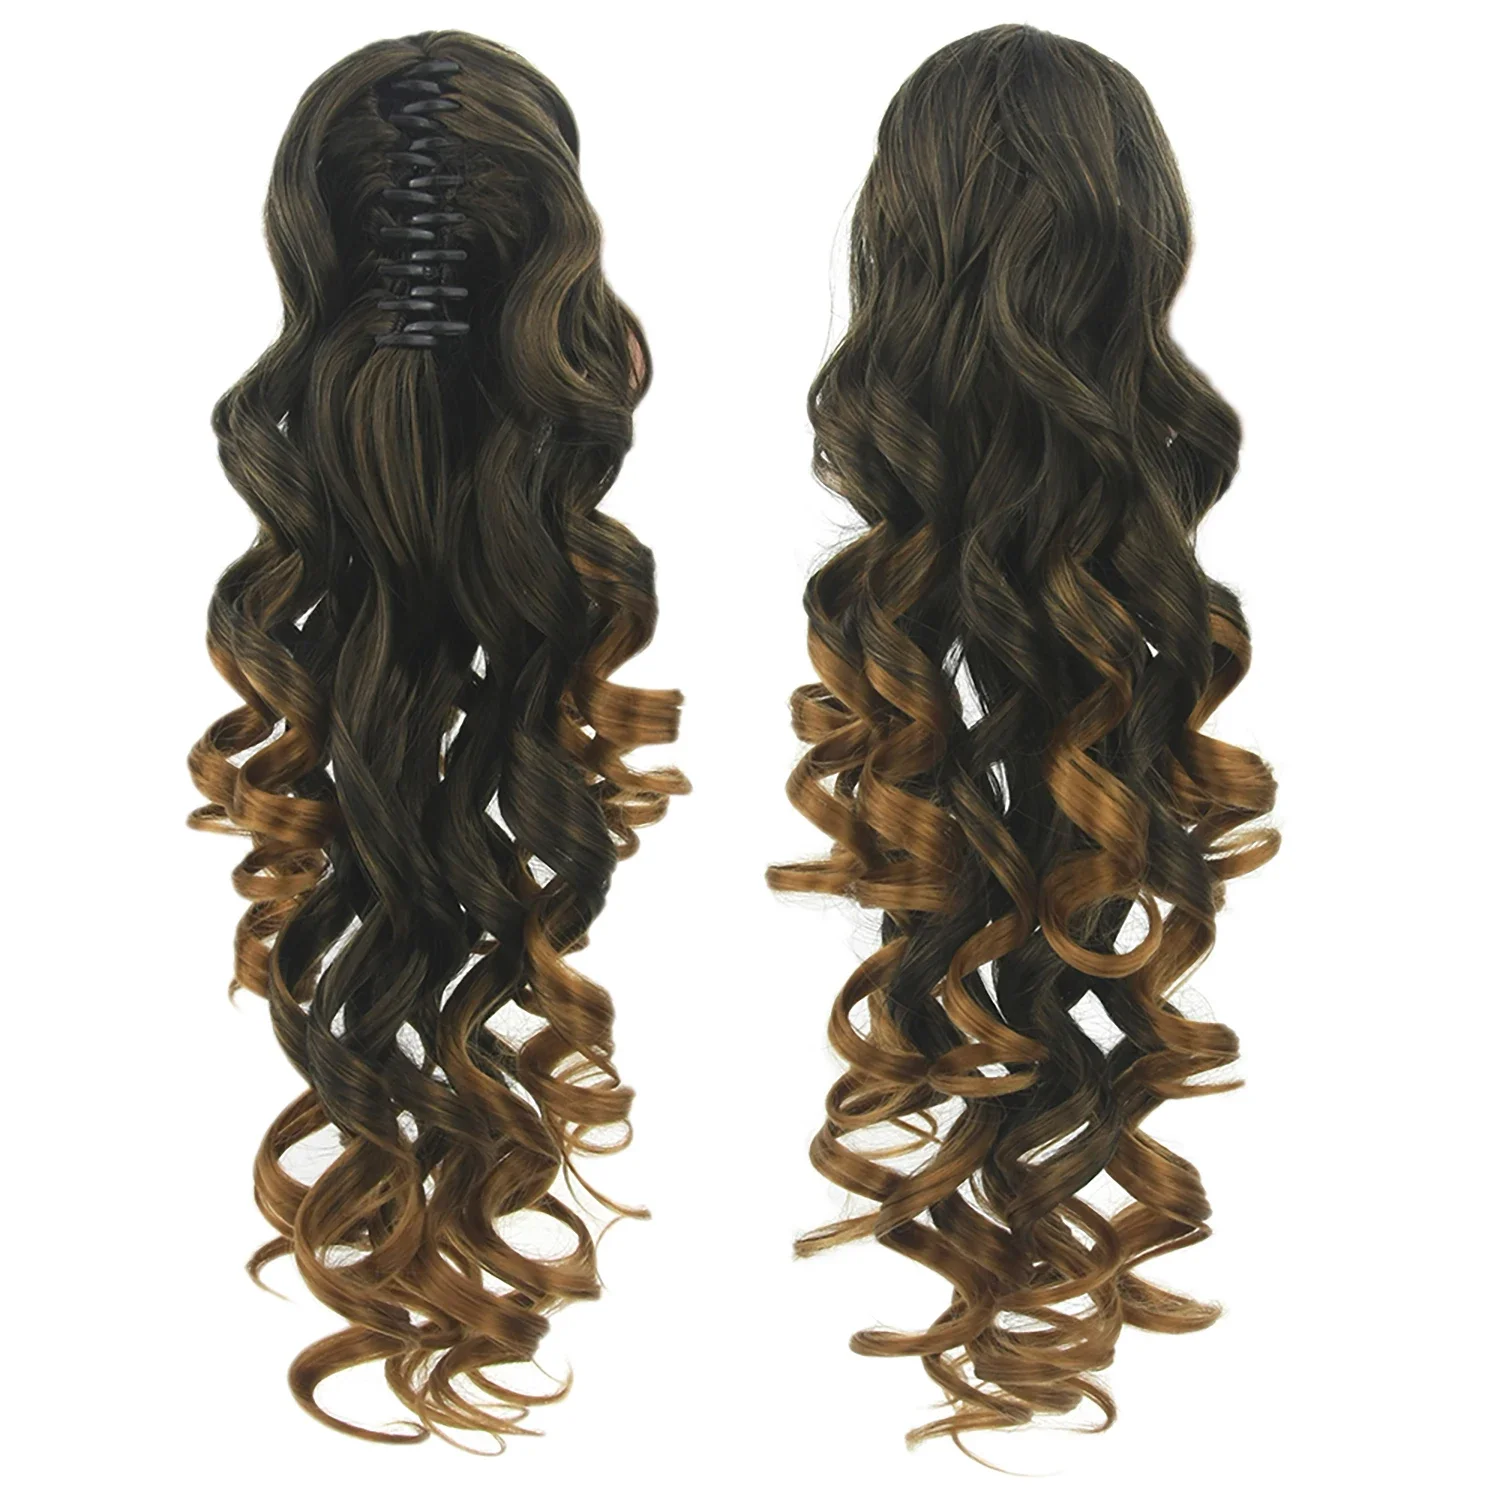 

Long Ombre Brown Curly Clip in Ponytails Hairpieces Claw Headwear Fake Pony Tail Hair Extensions Postiche Peluca Roja